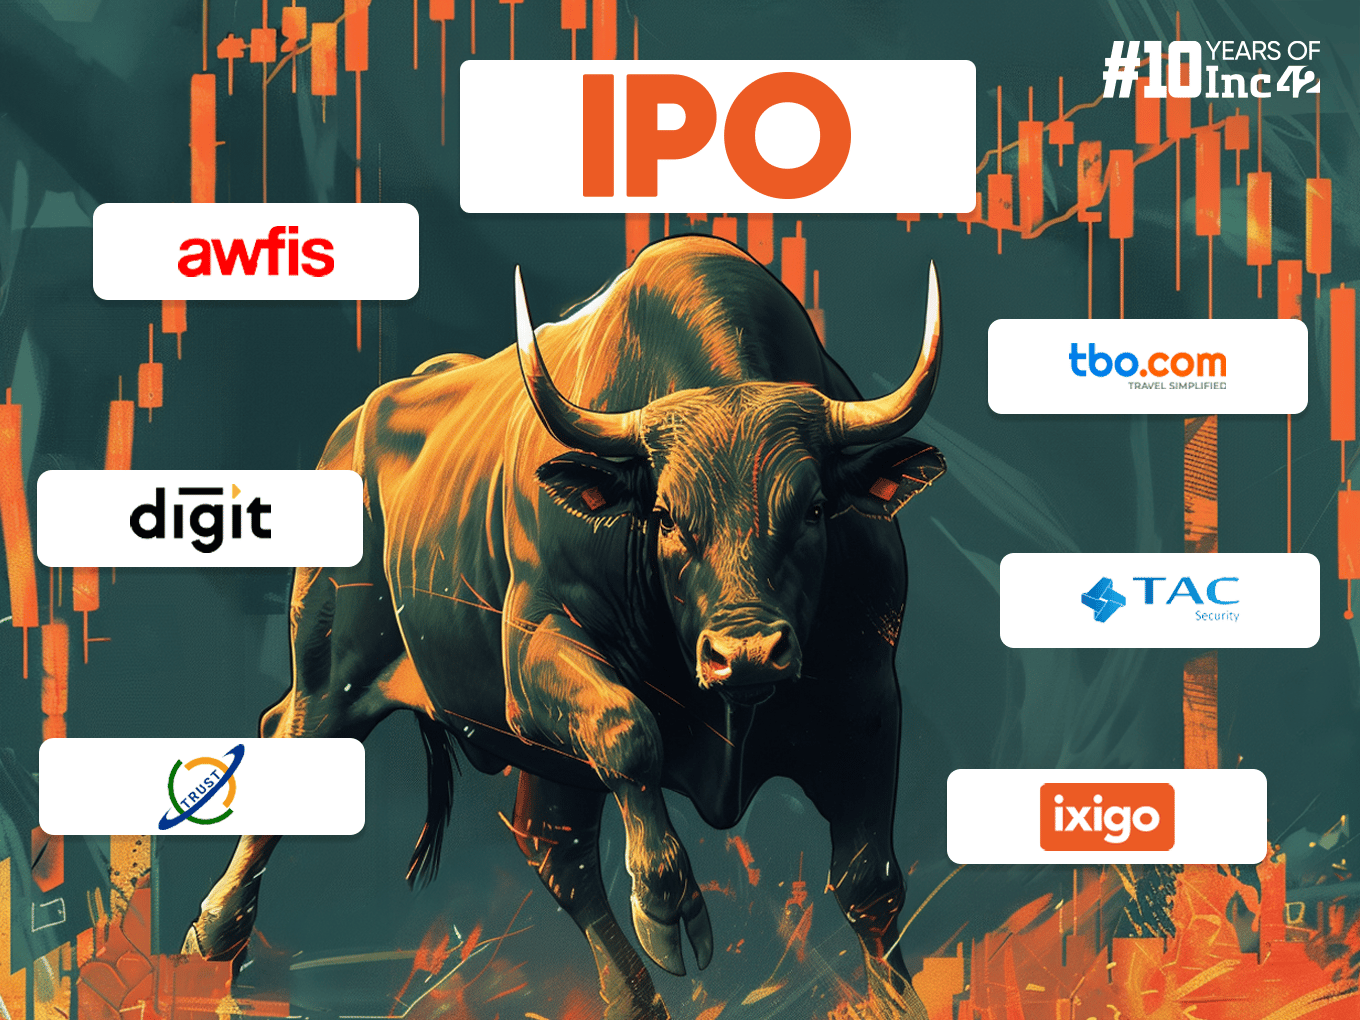 From Valuations To First-Mover Advantage: What’s Fuelling The Startup IPO Frenzy This Year